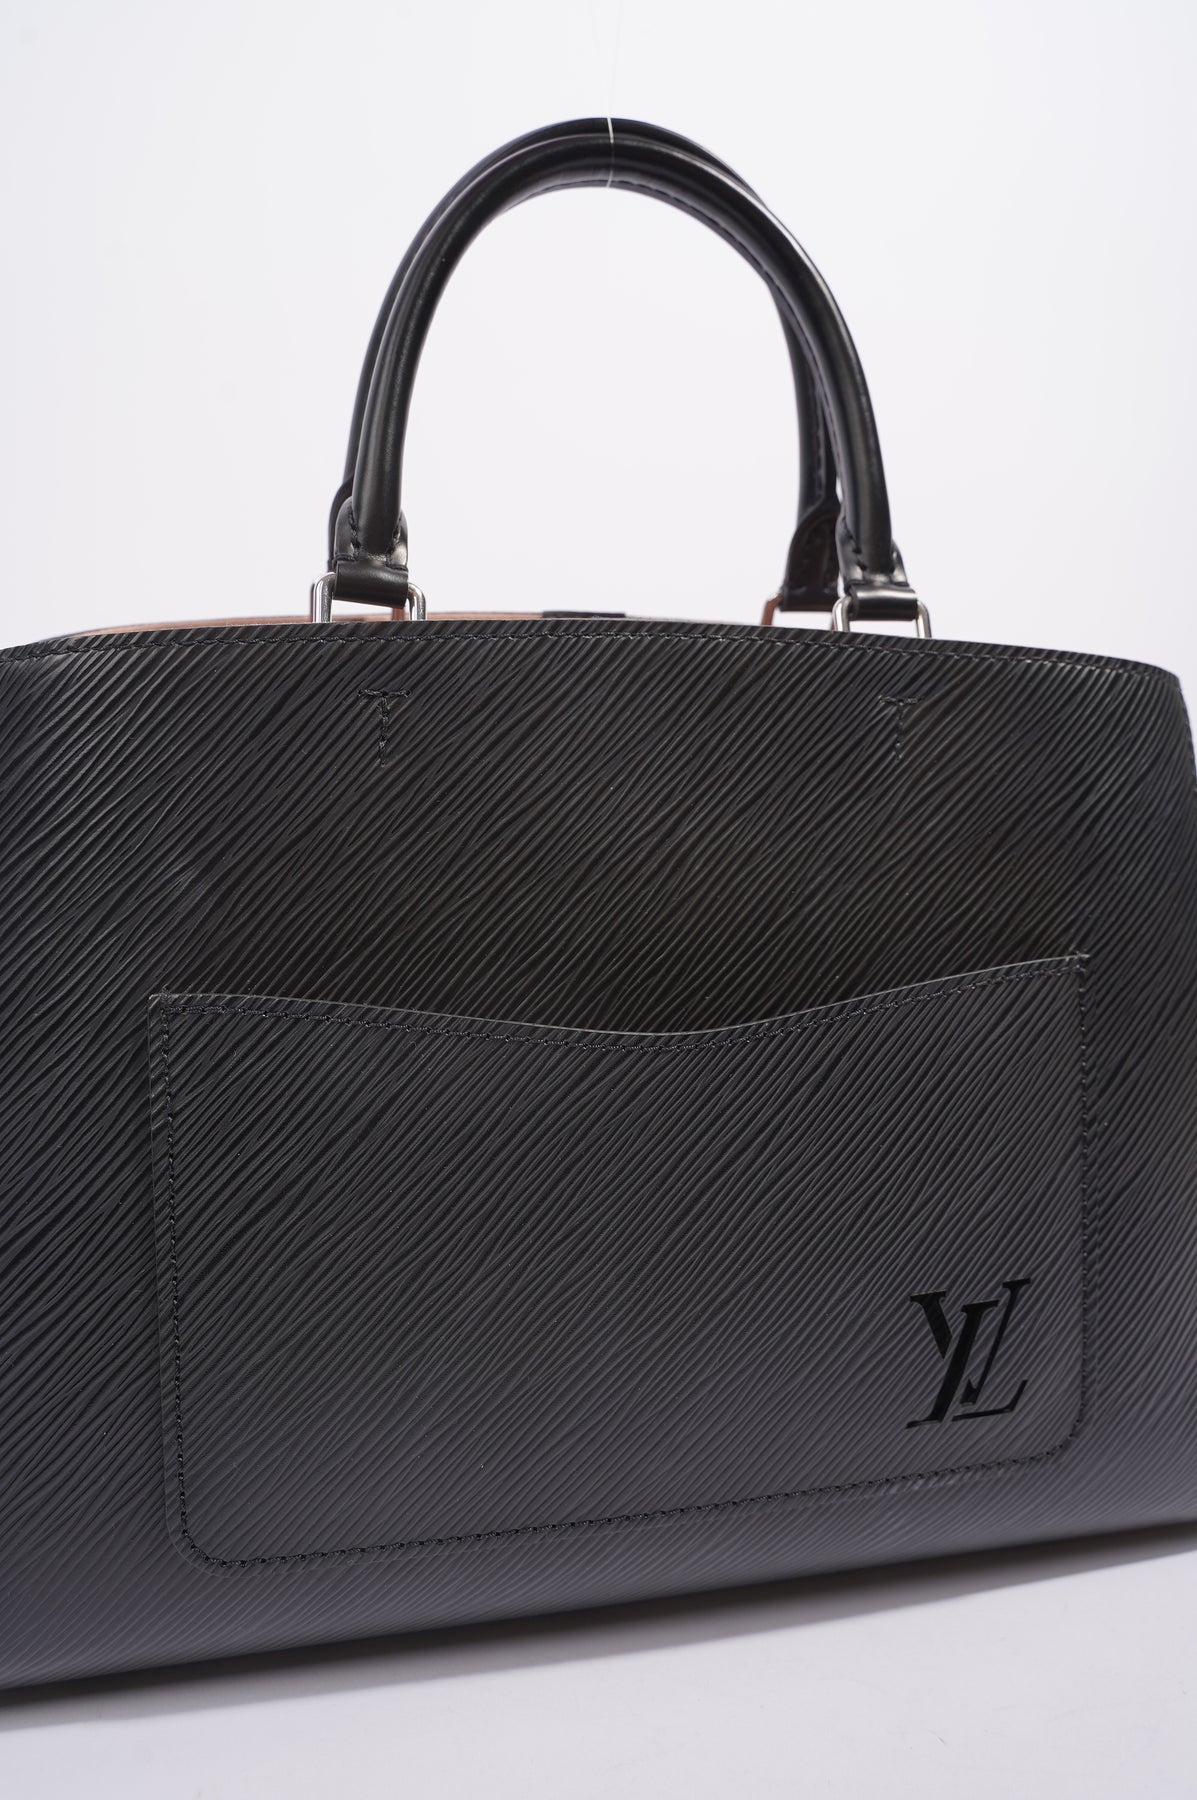 Louis Vuitton Womens Marelle Tote Bag Black Epi Leather MM – Luxe